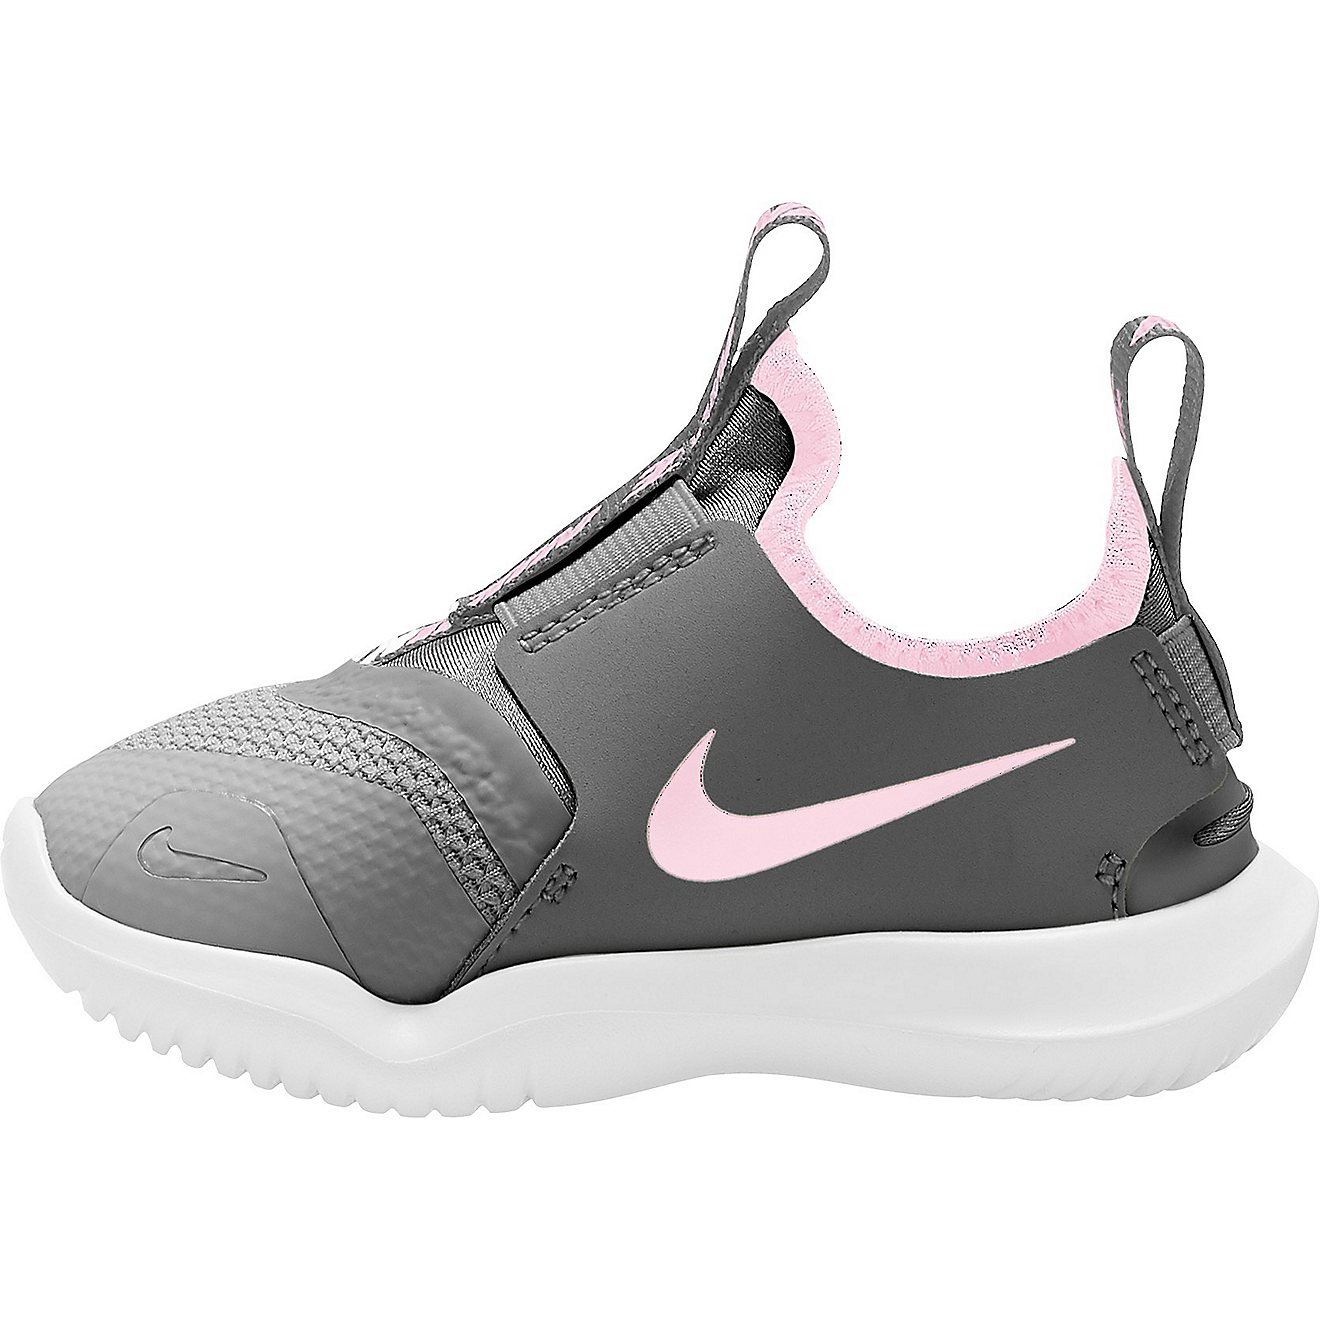 Nike Toddler Girls' Flex Runner Fade Shoes                                                                                       - view number 2